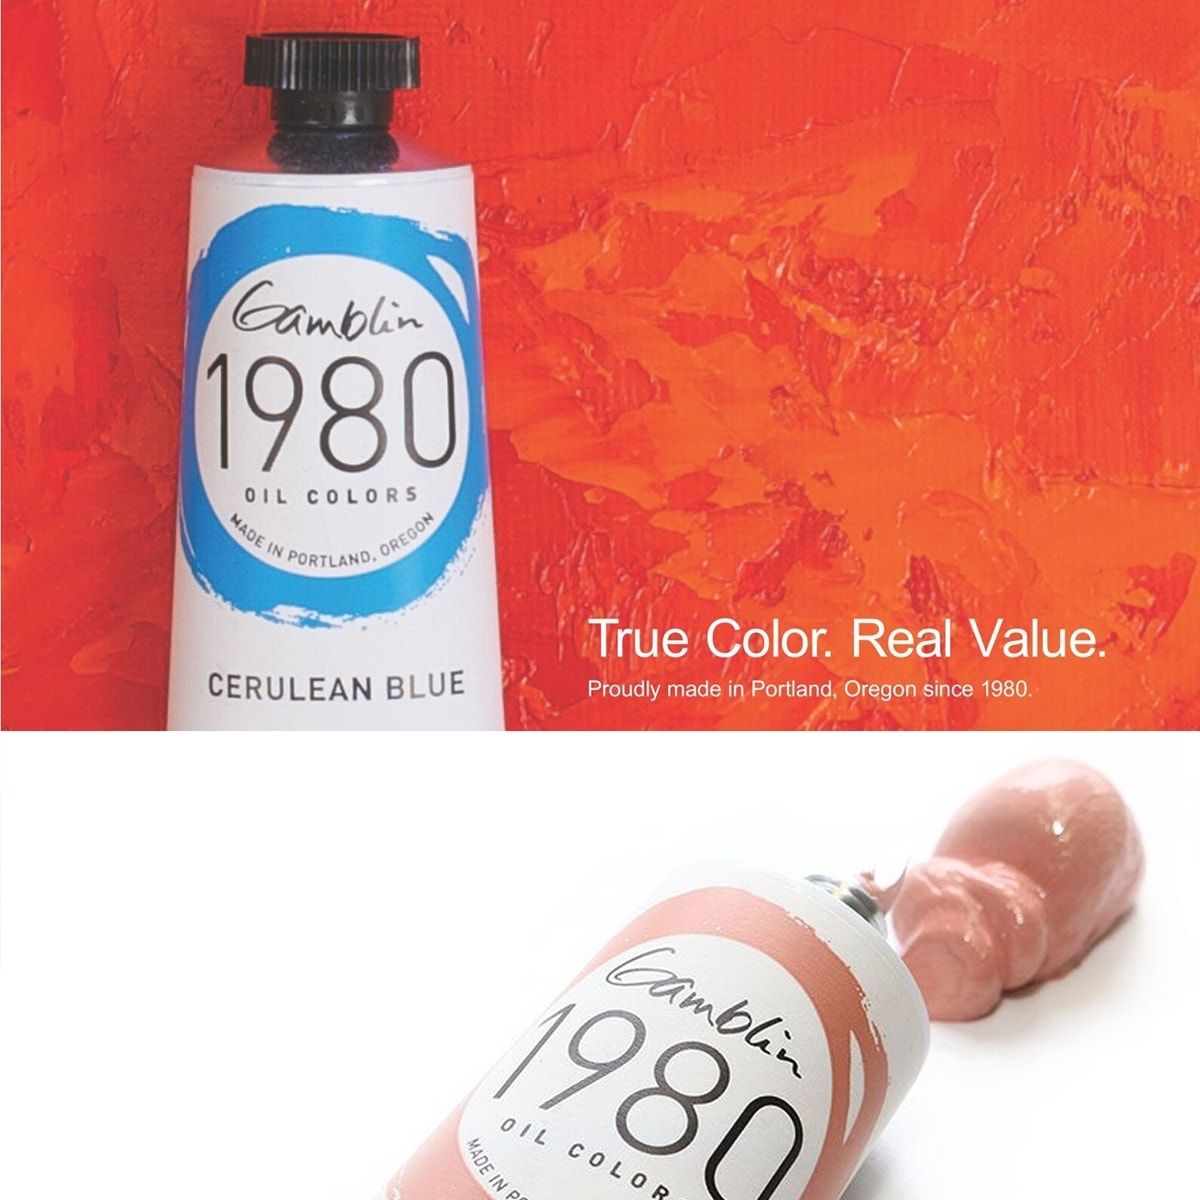 Made with true pigments - True Color At A Real Value